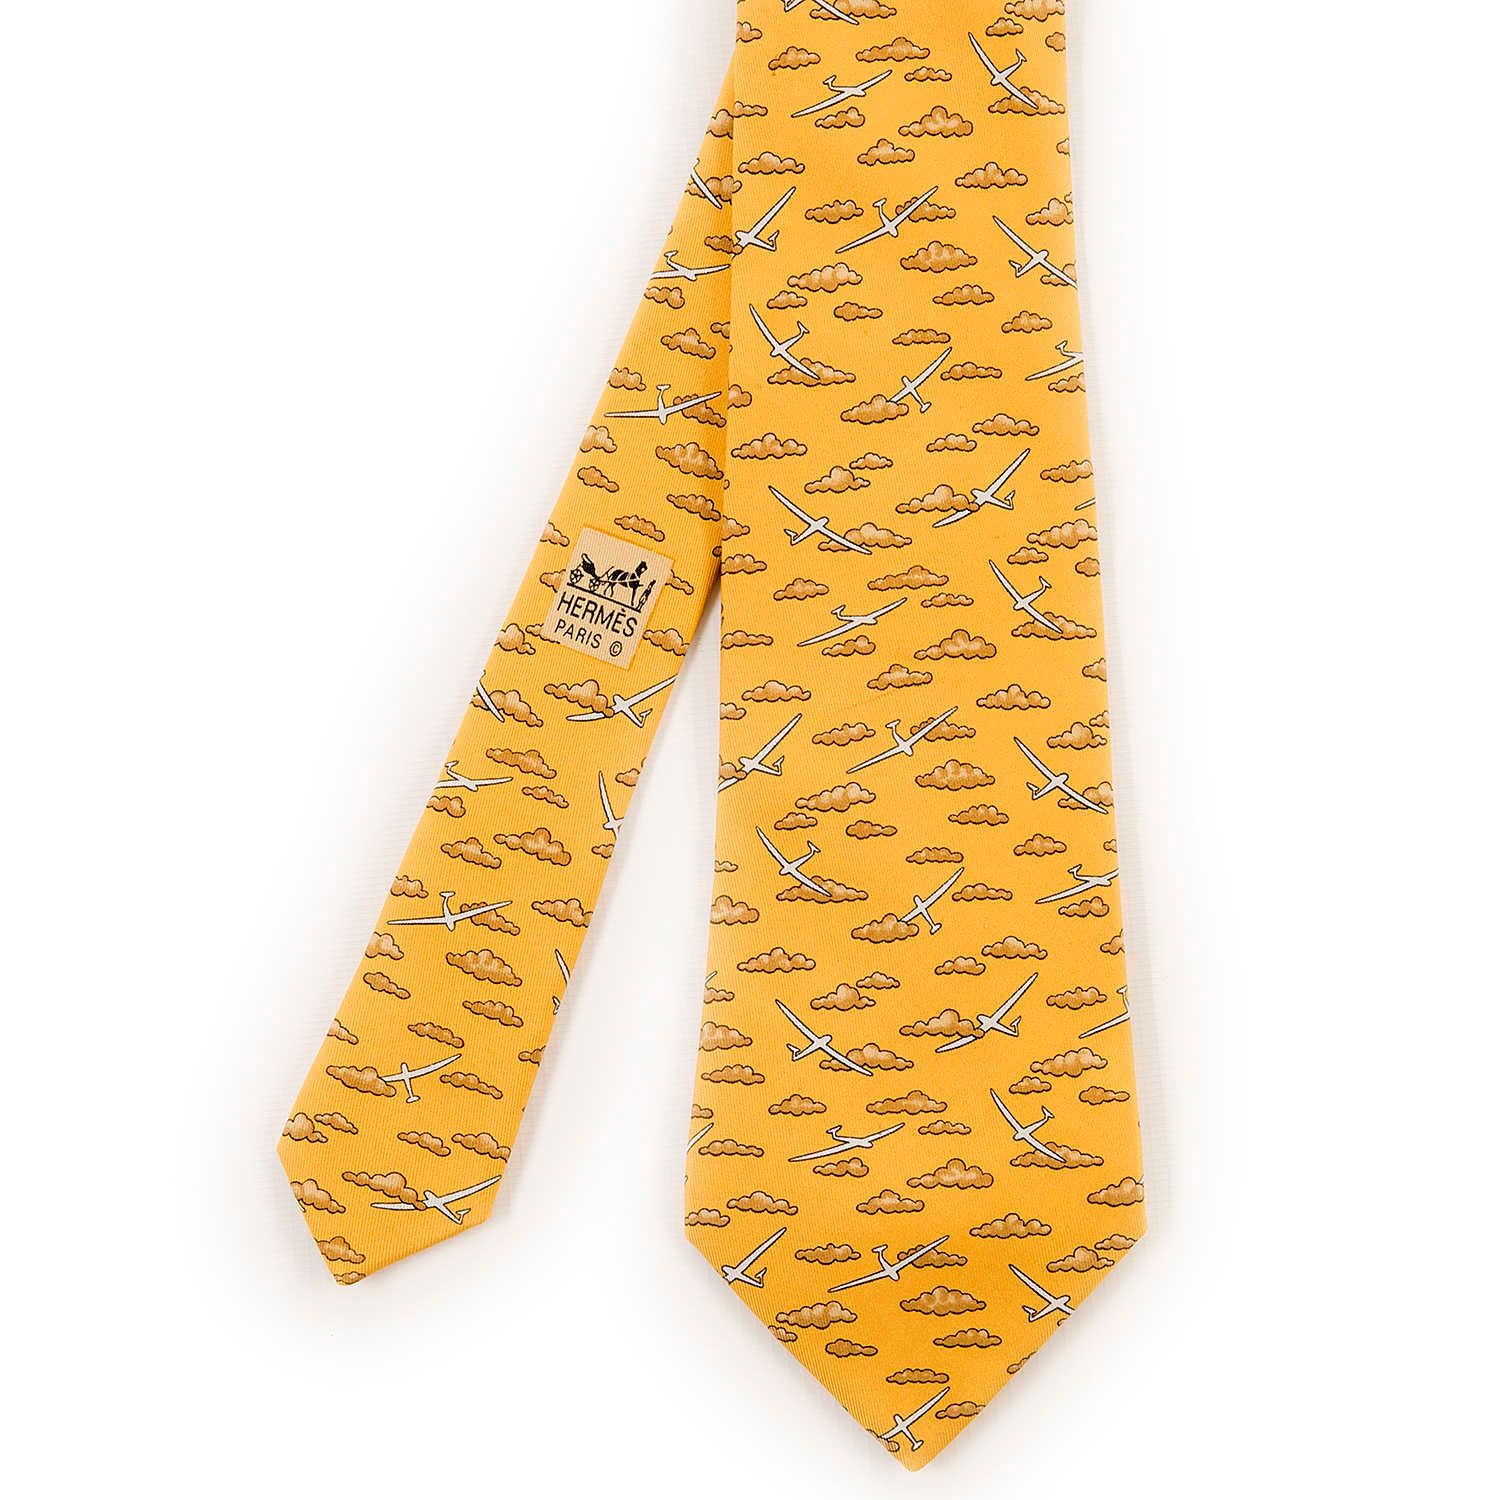 In pristine condition, this delightful Vintage Hermes Silk Tie, 'Gliding' has a whimsical design of Gliders and Clouds. The Tie is on a Sand yellow colour ground.